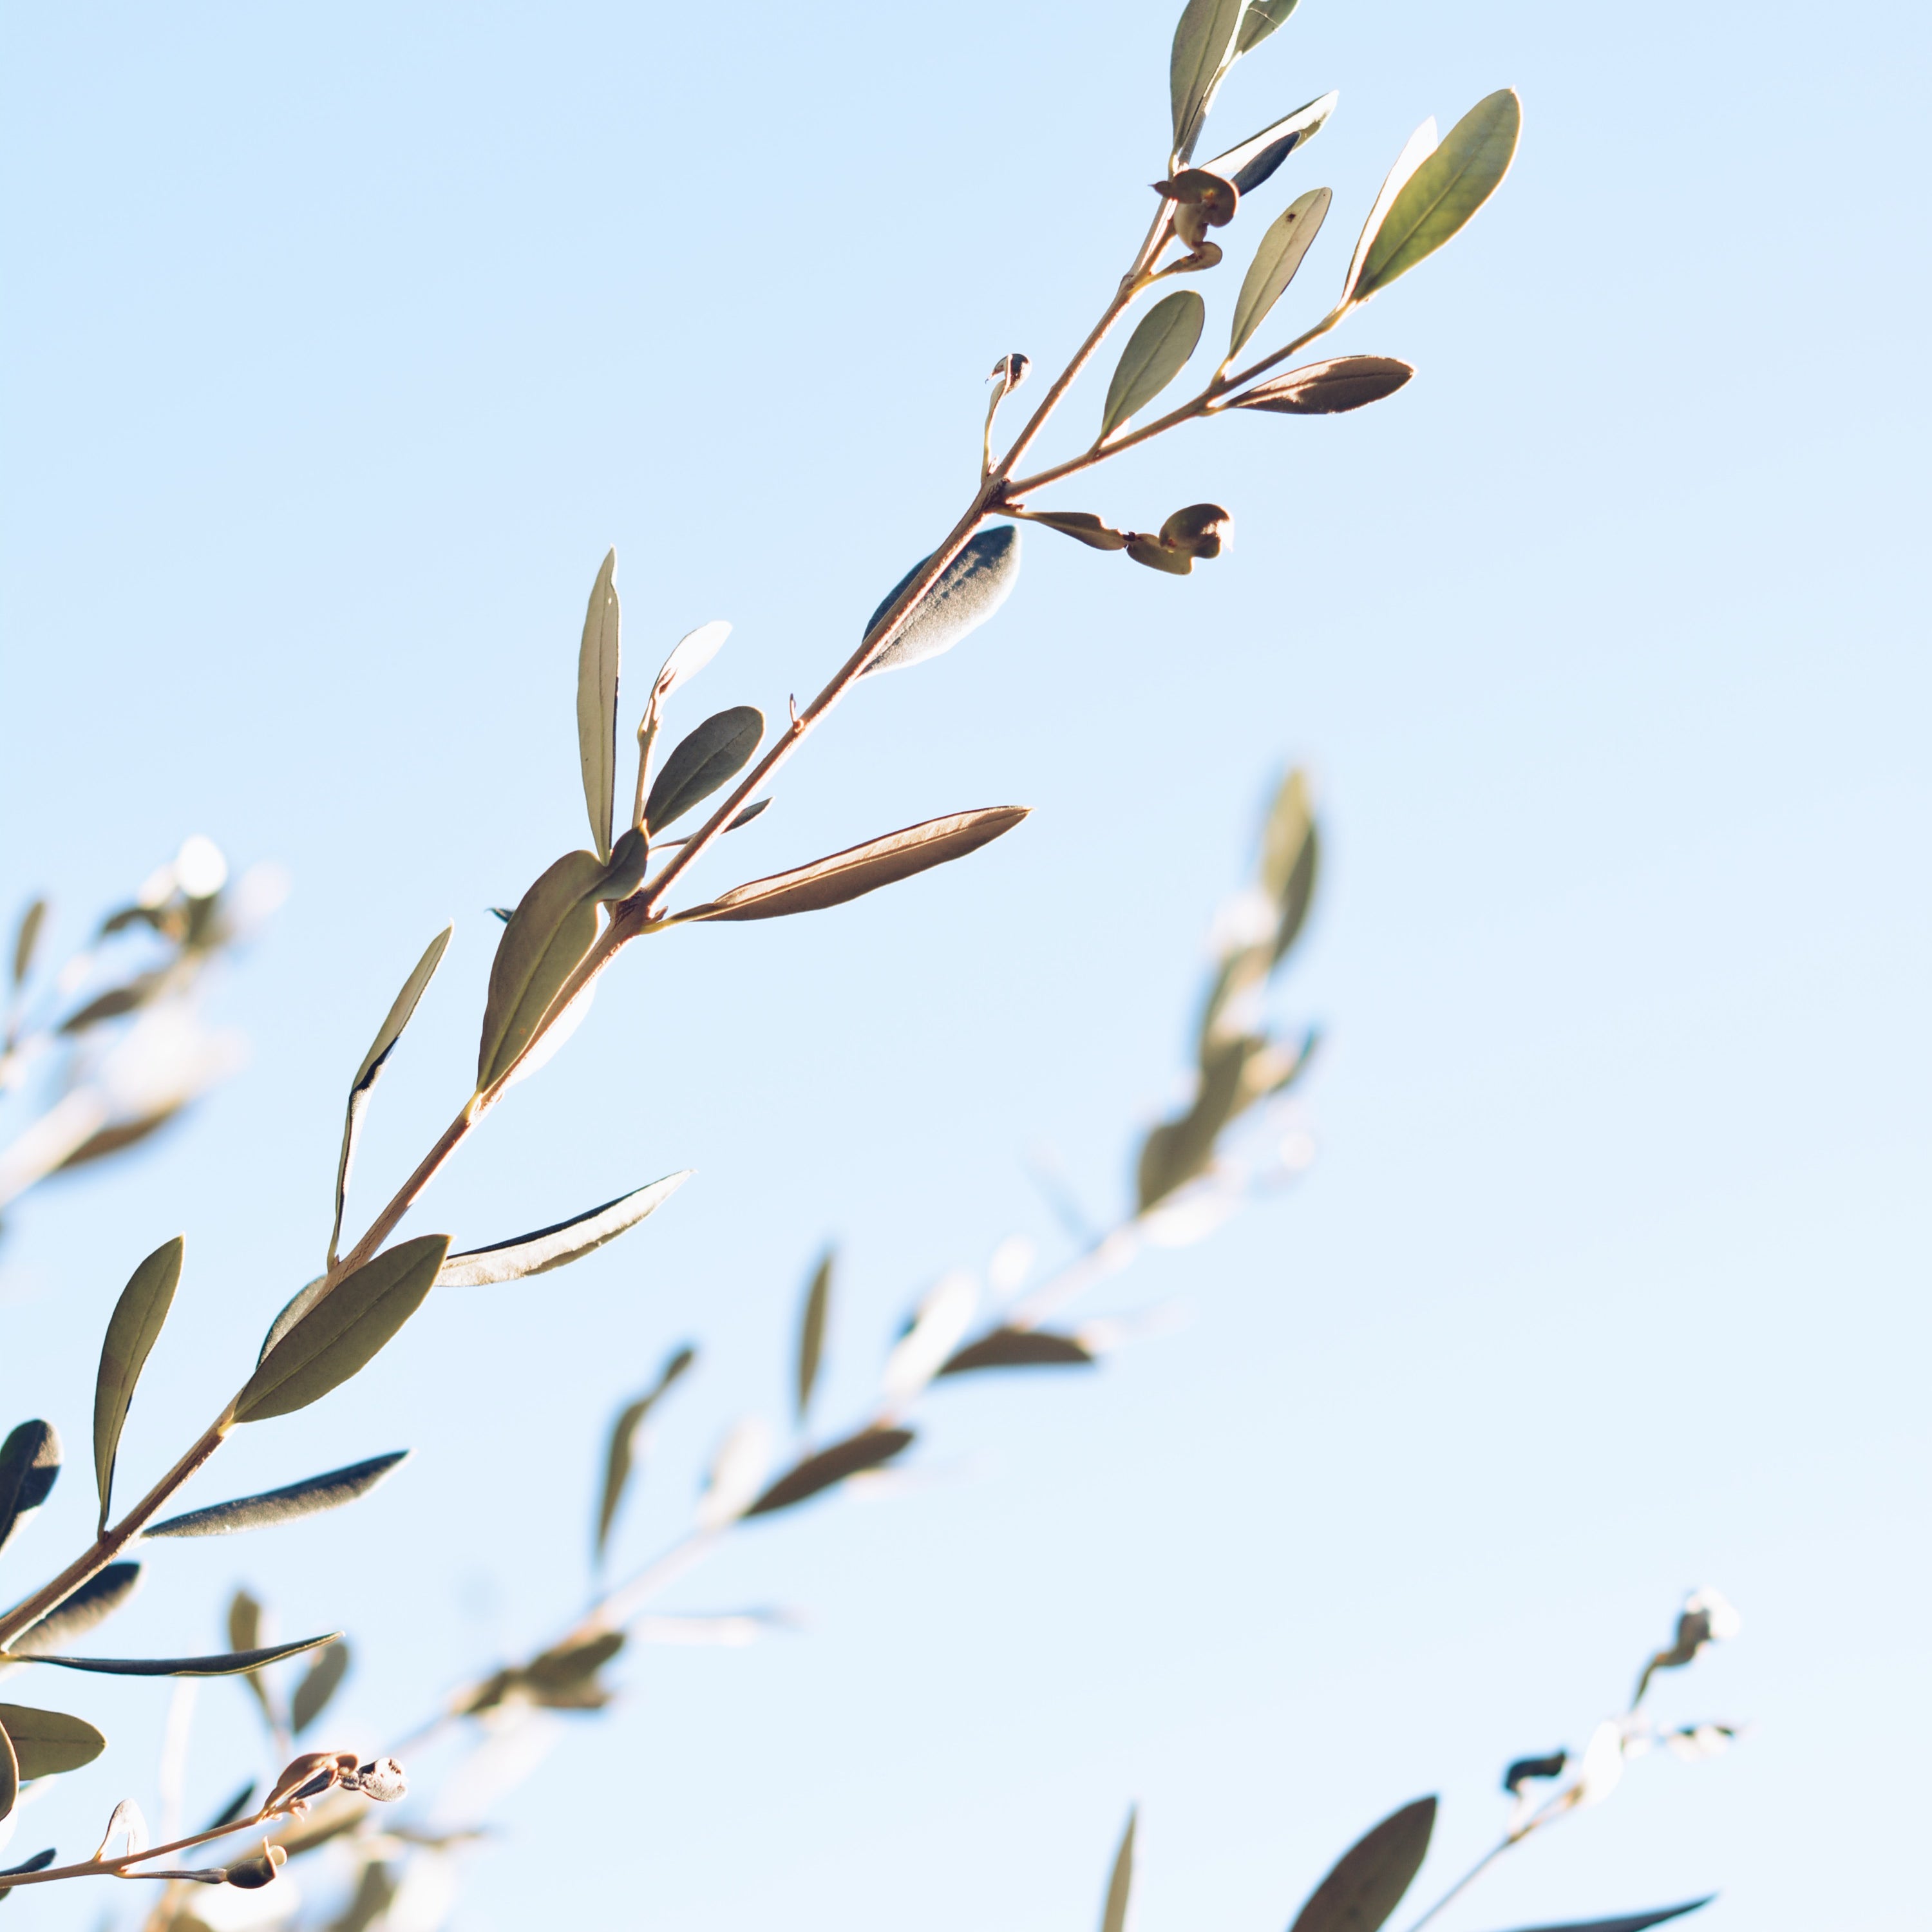 olive branches with a background of the blue sky